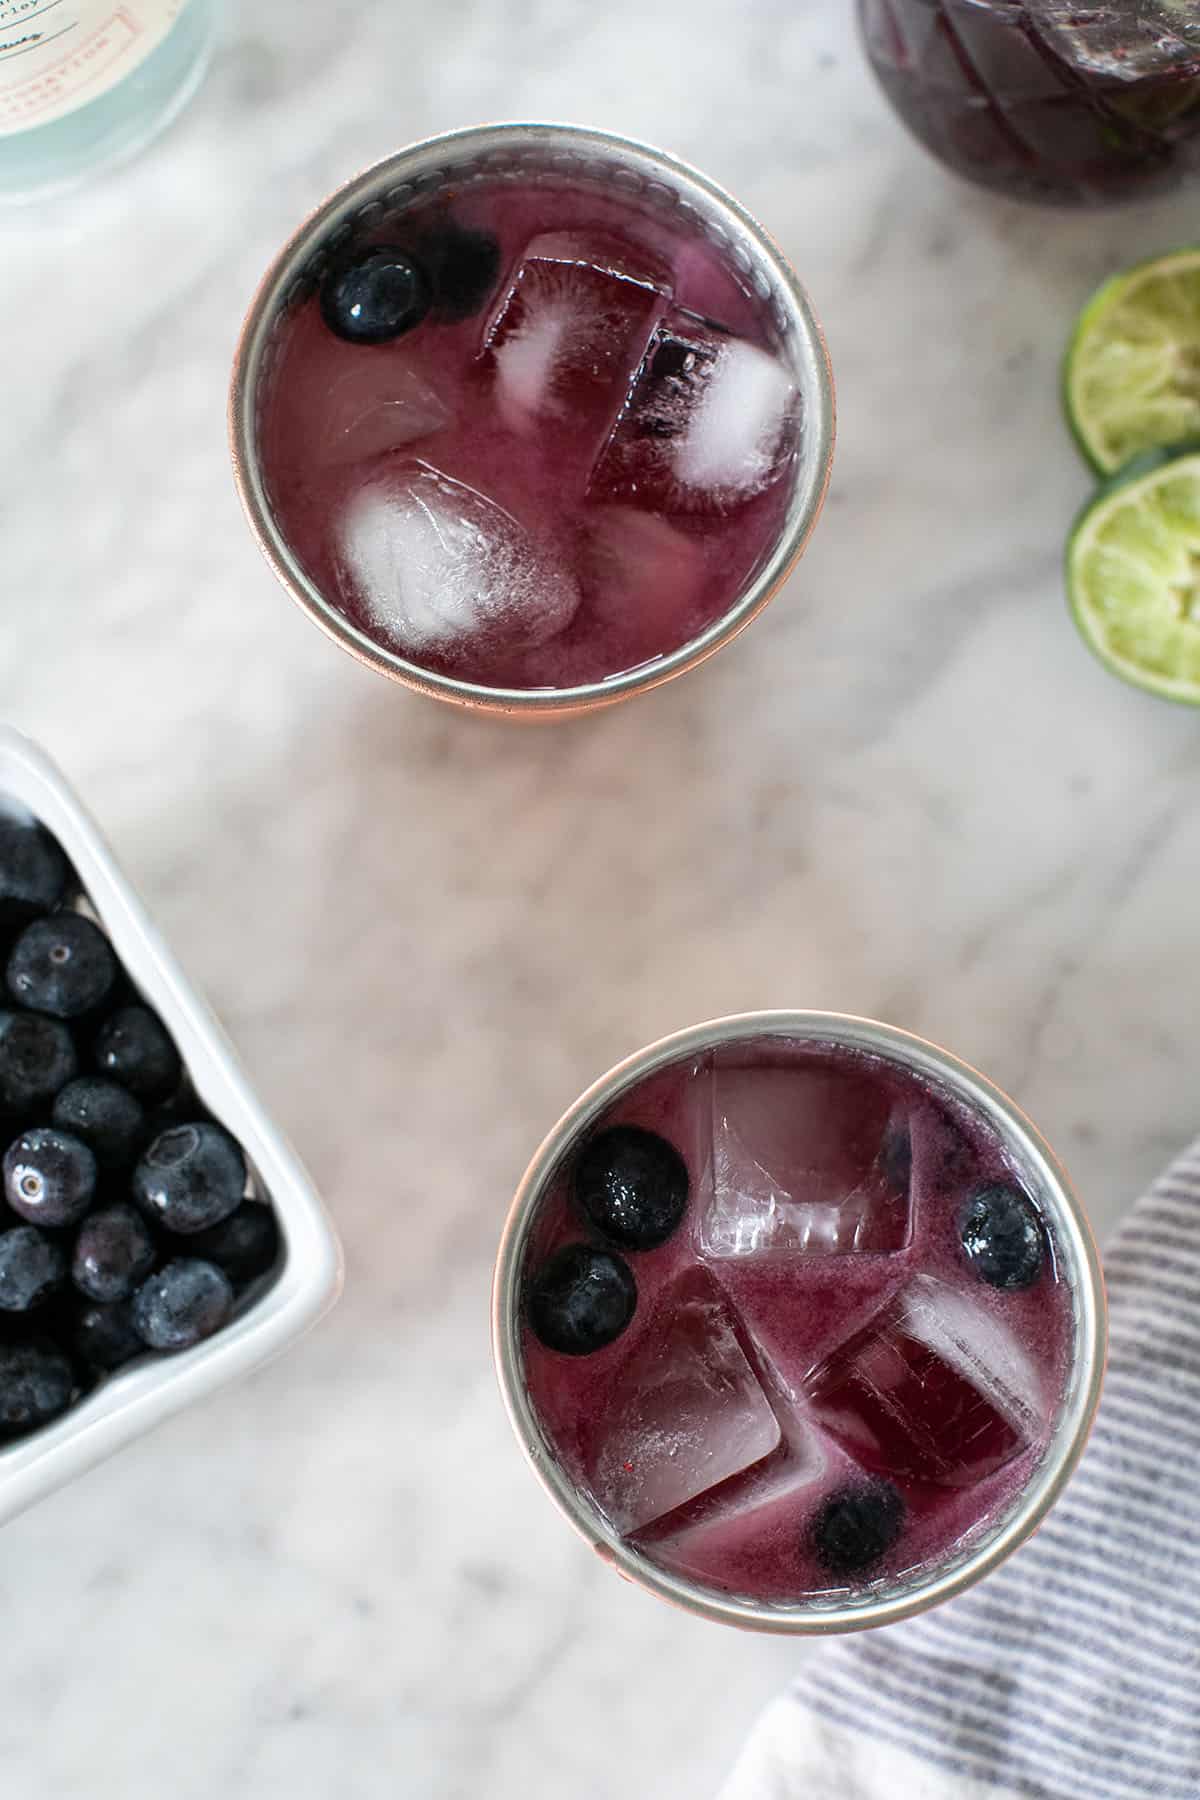 Two blueberry Moscow mules in copper mugs with ice and fresh blueberries.